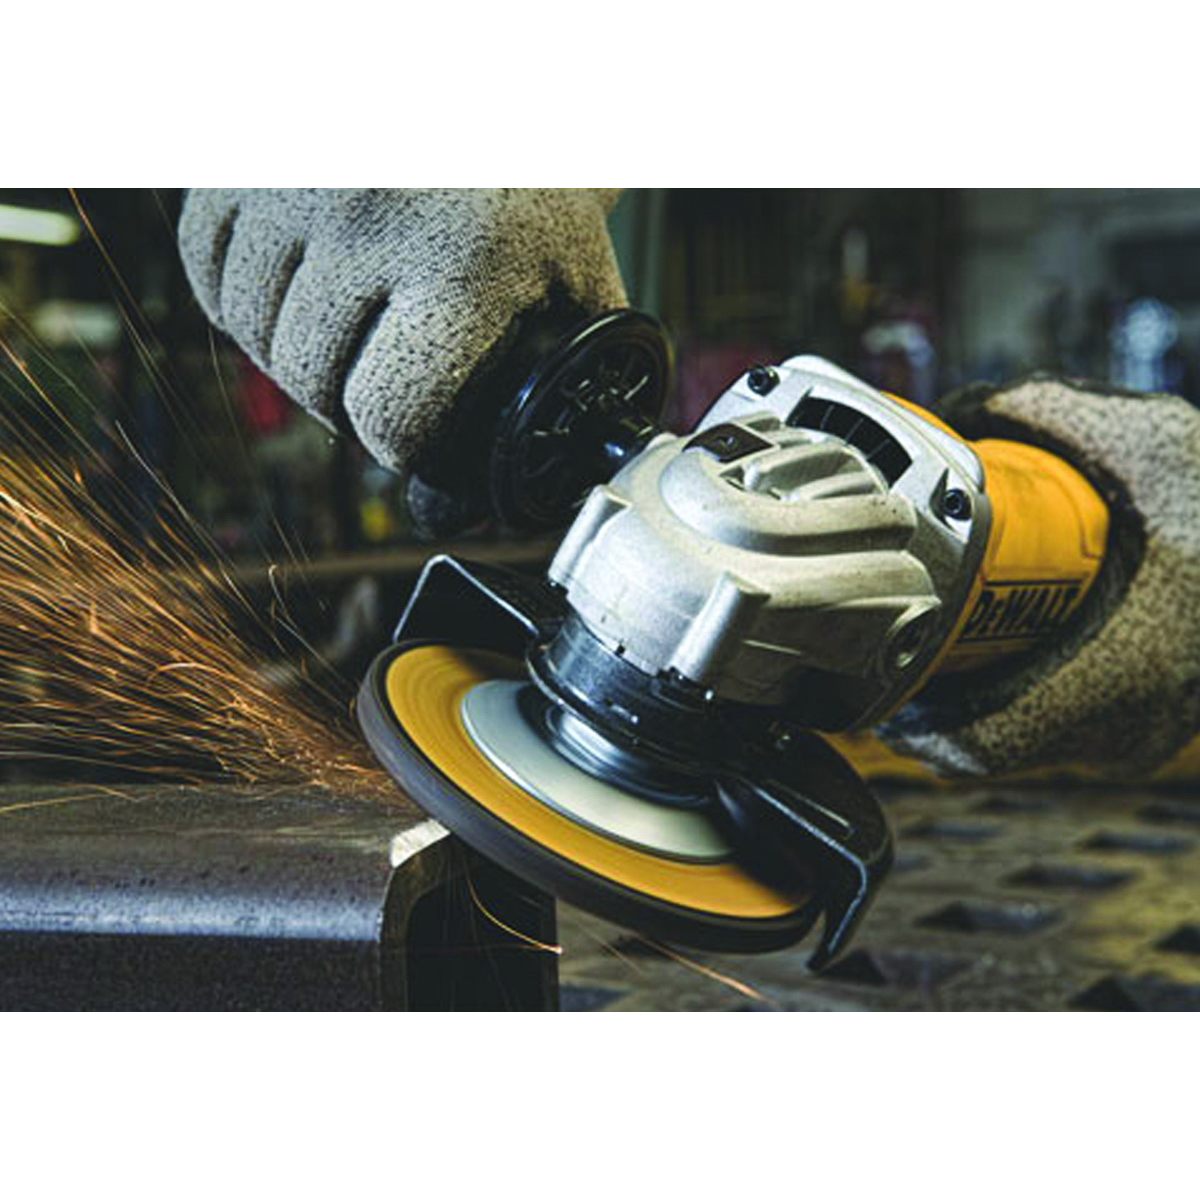 DeWALT DWE402 Small Angle Grinder, 11 A, 5/8-11 Spindle, 4-1/2 in Dia Wheel, 11,000 rpm Speed - 8